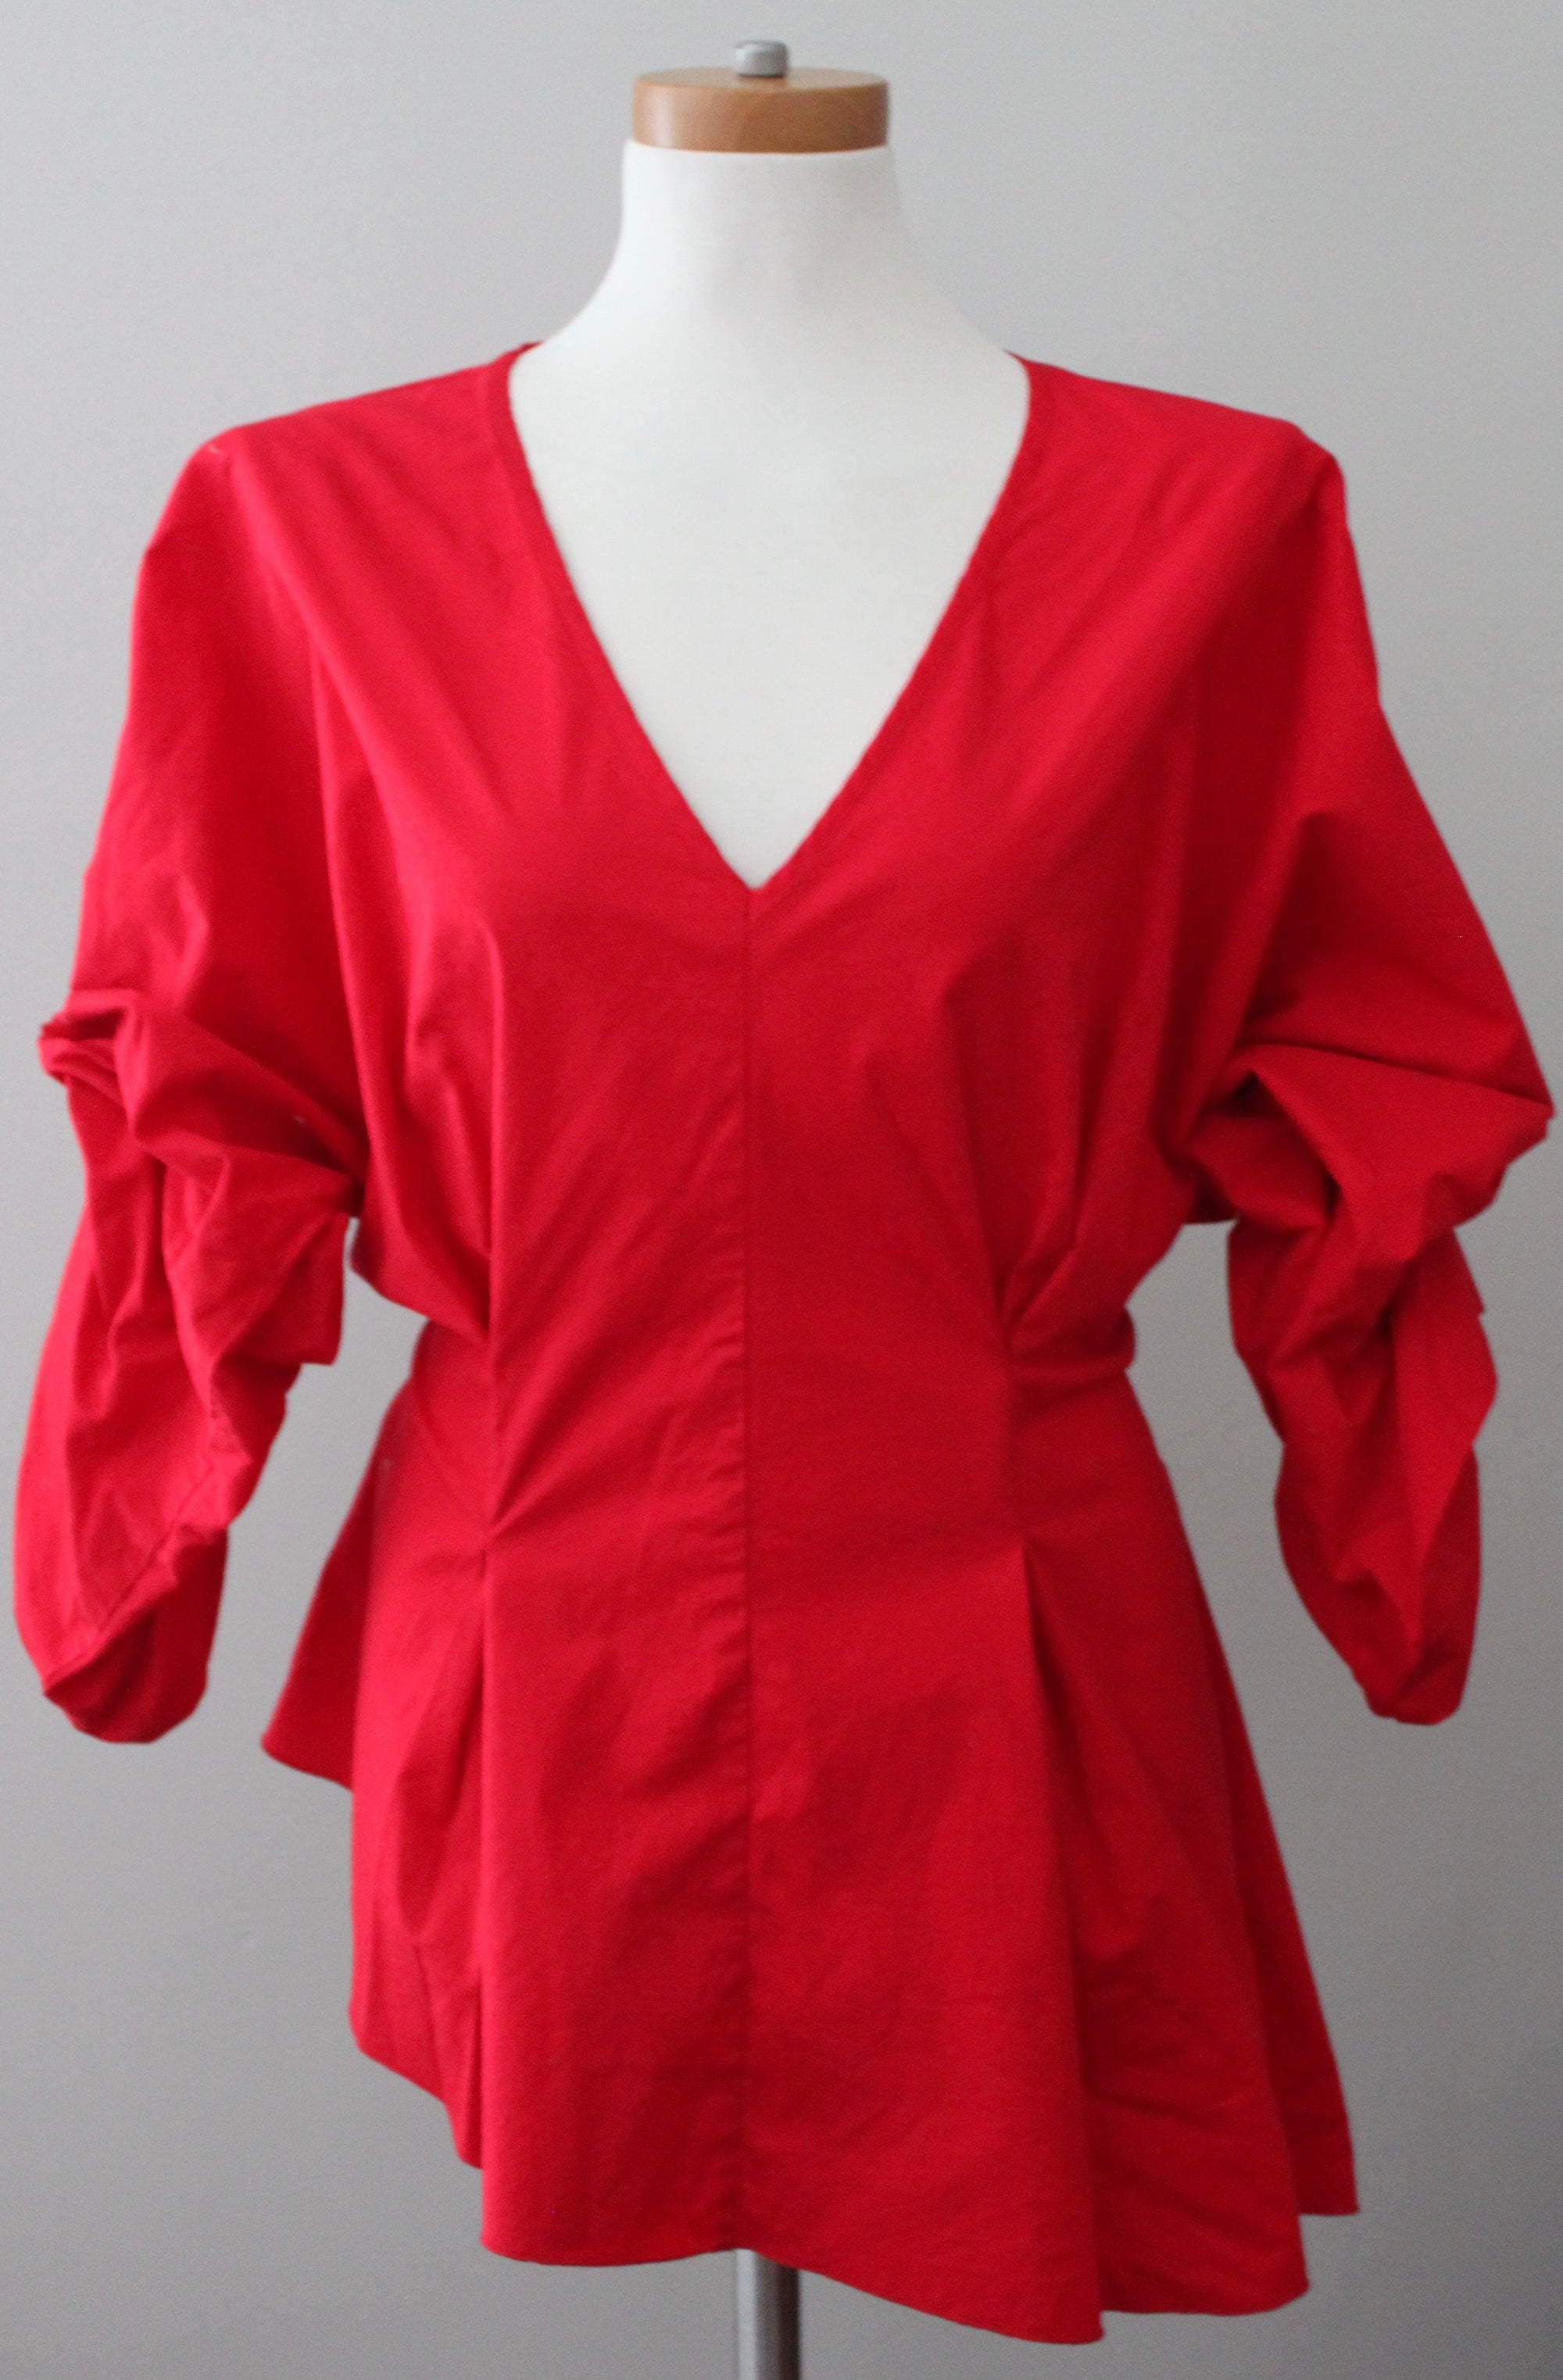 KENTARO for PROJECT RUNWAY Bright Winter red blouse. 